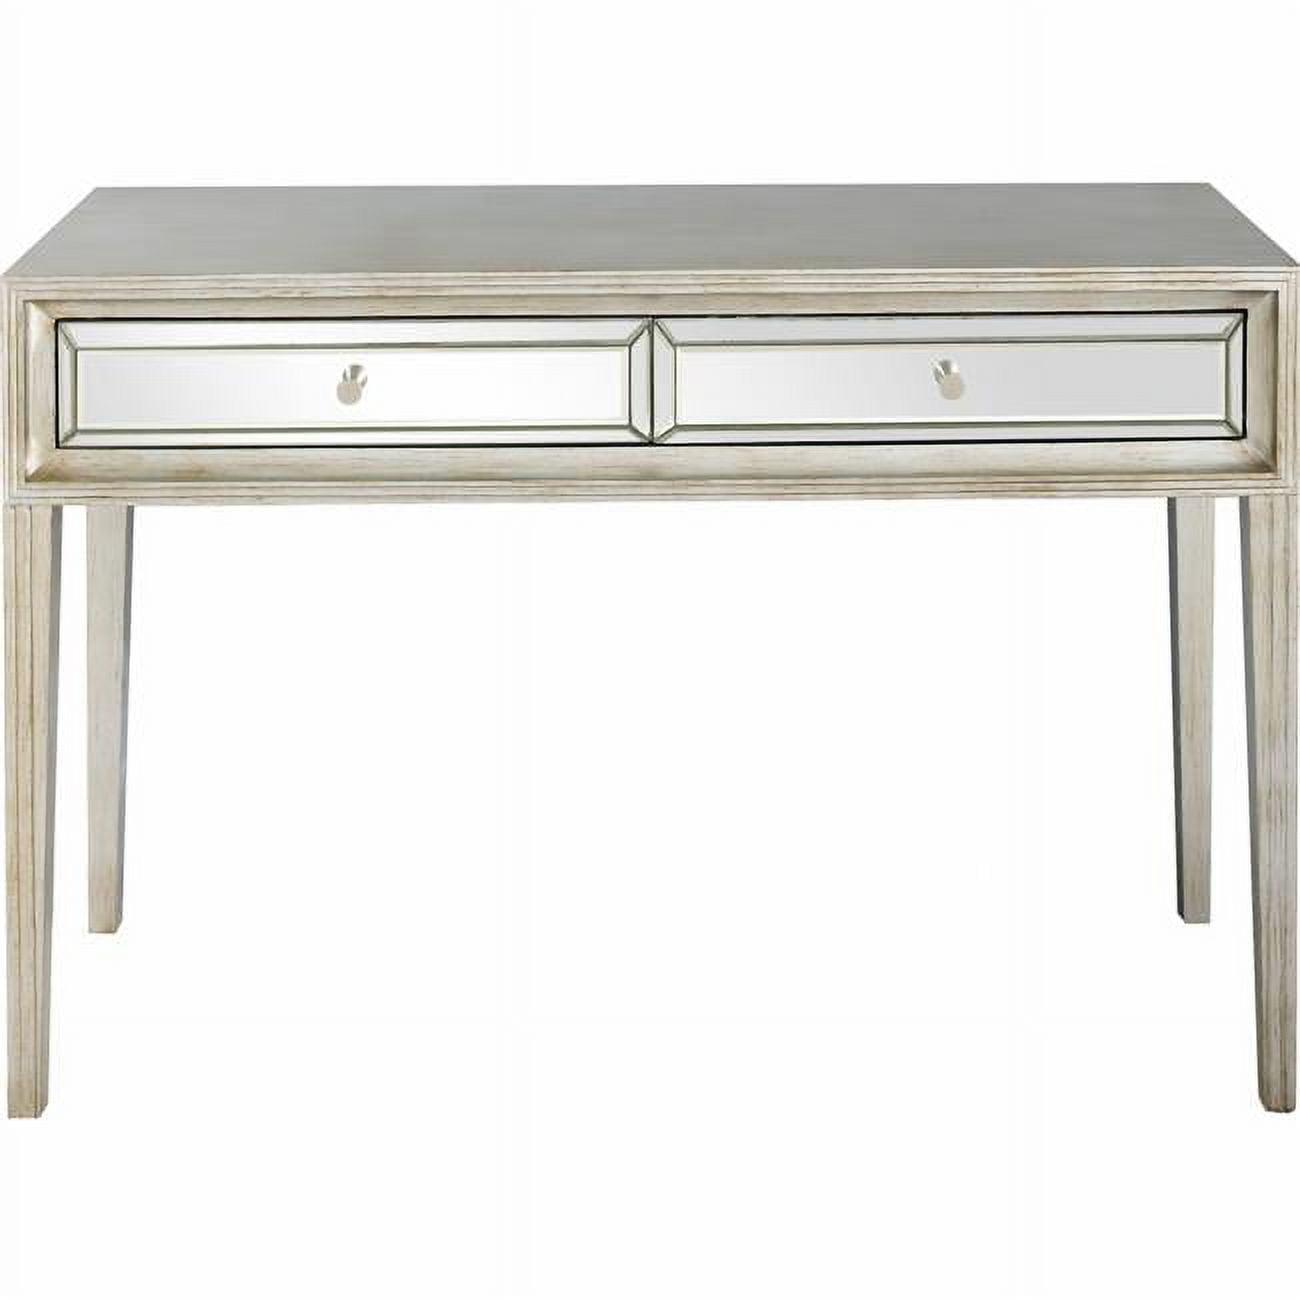 Elegant Antiqued Silver 48" Wood, Metal & Glass Console Table with Storage